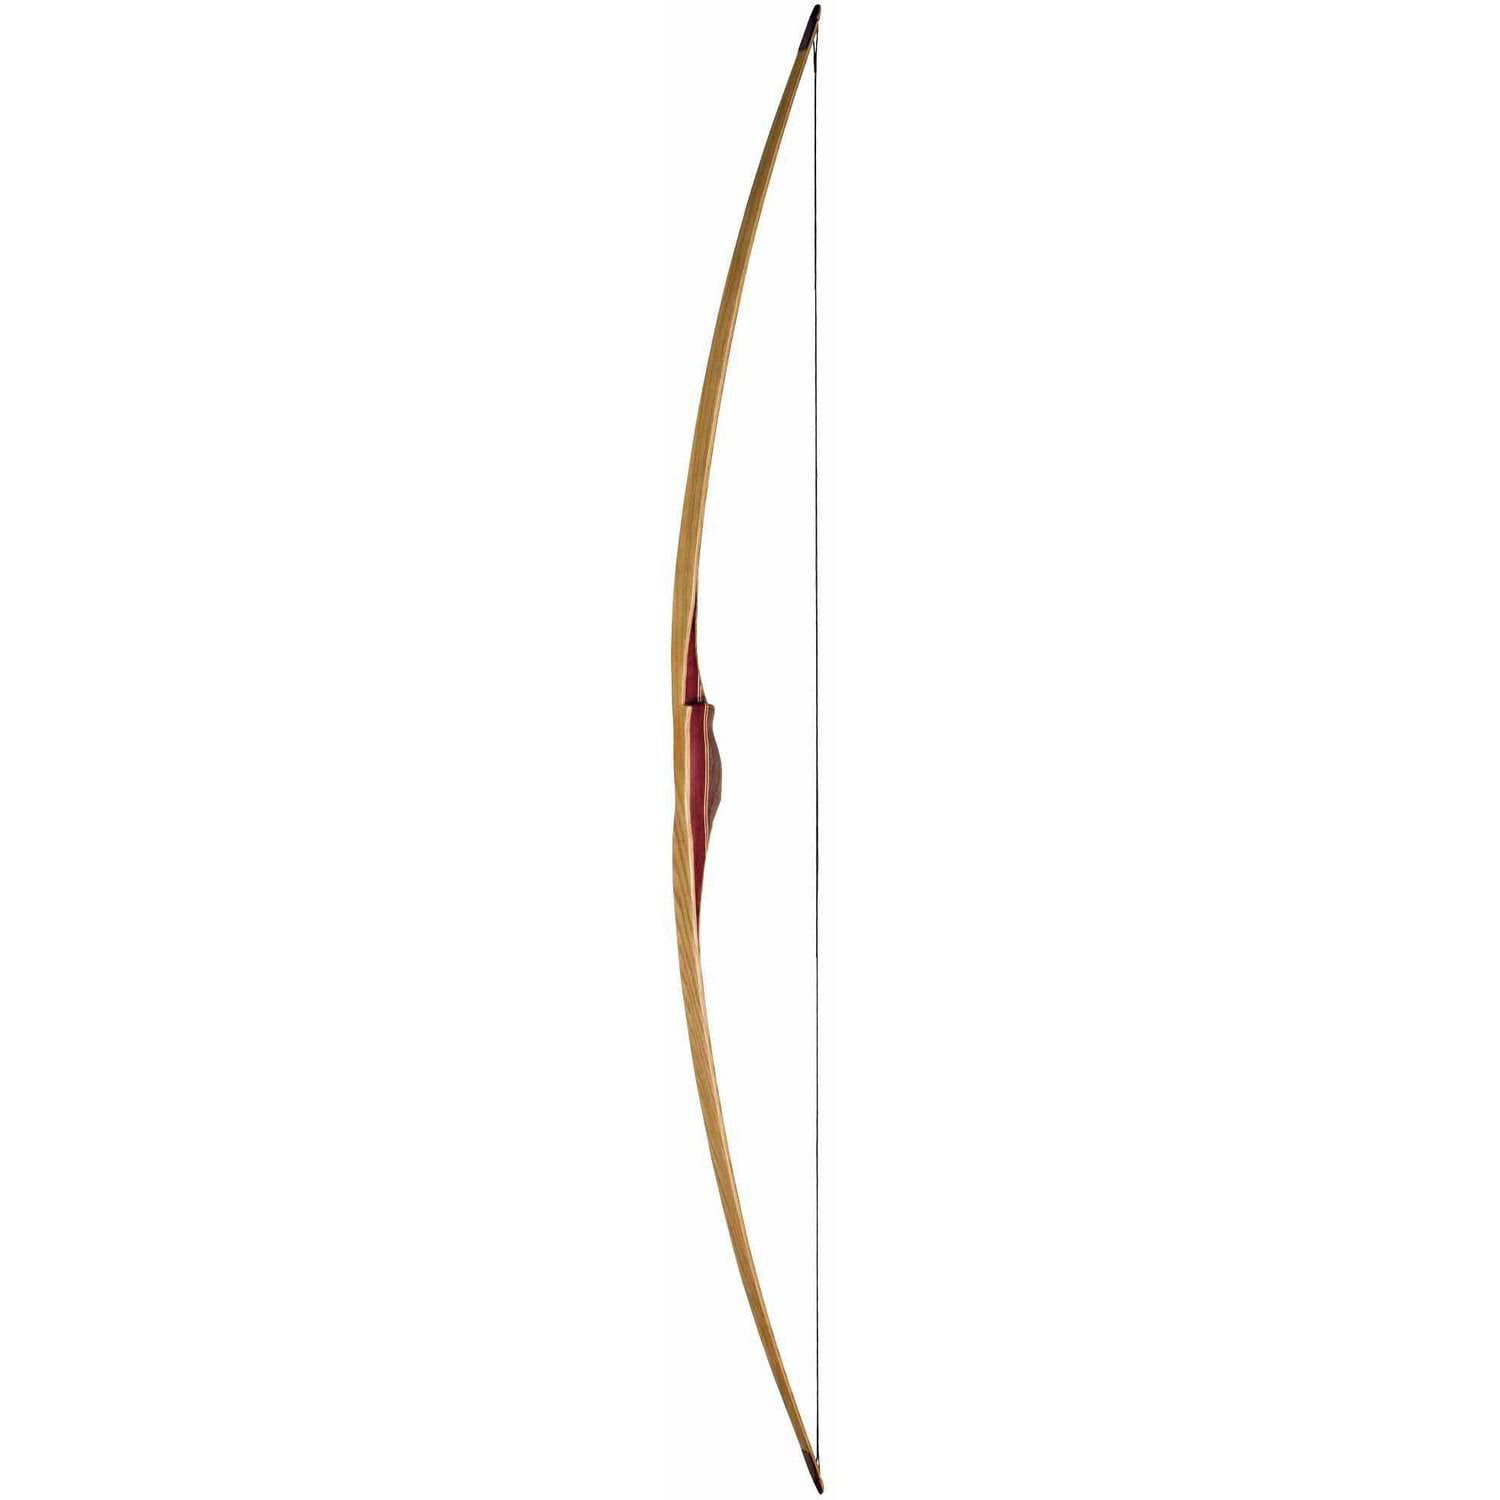 68" hickory 45lbs @ 28" Right handed Handcrafted Traditional longbow